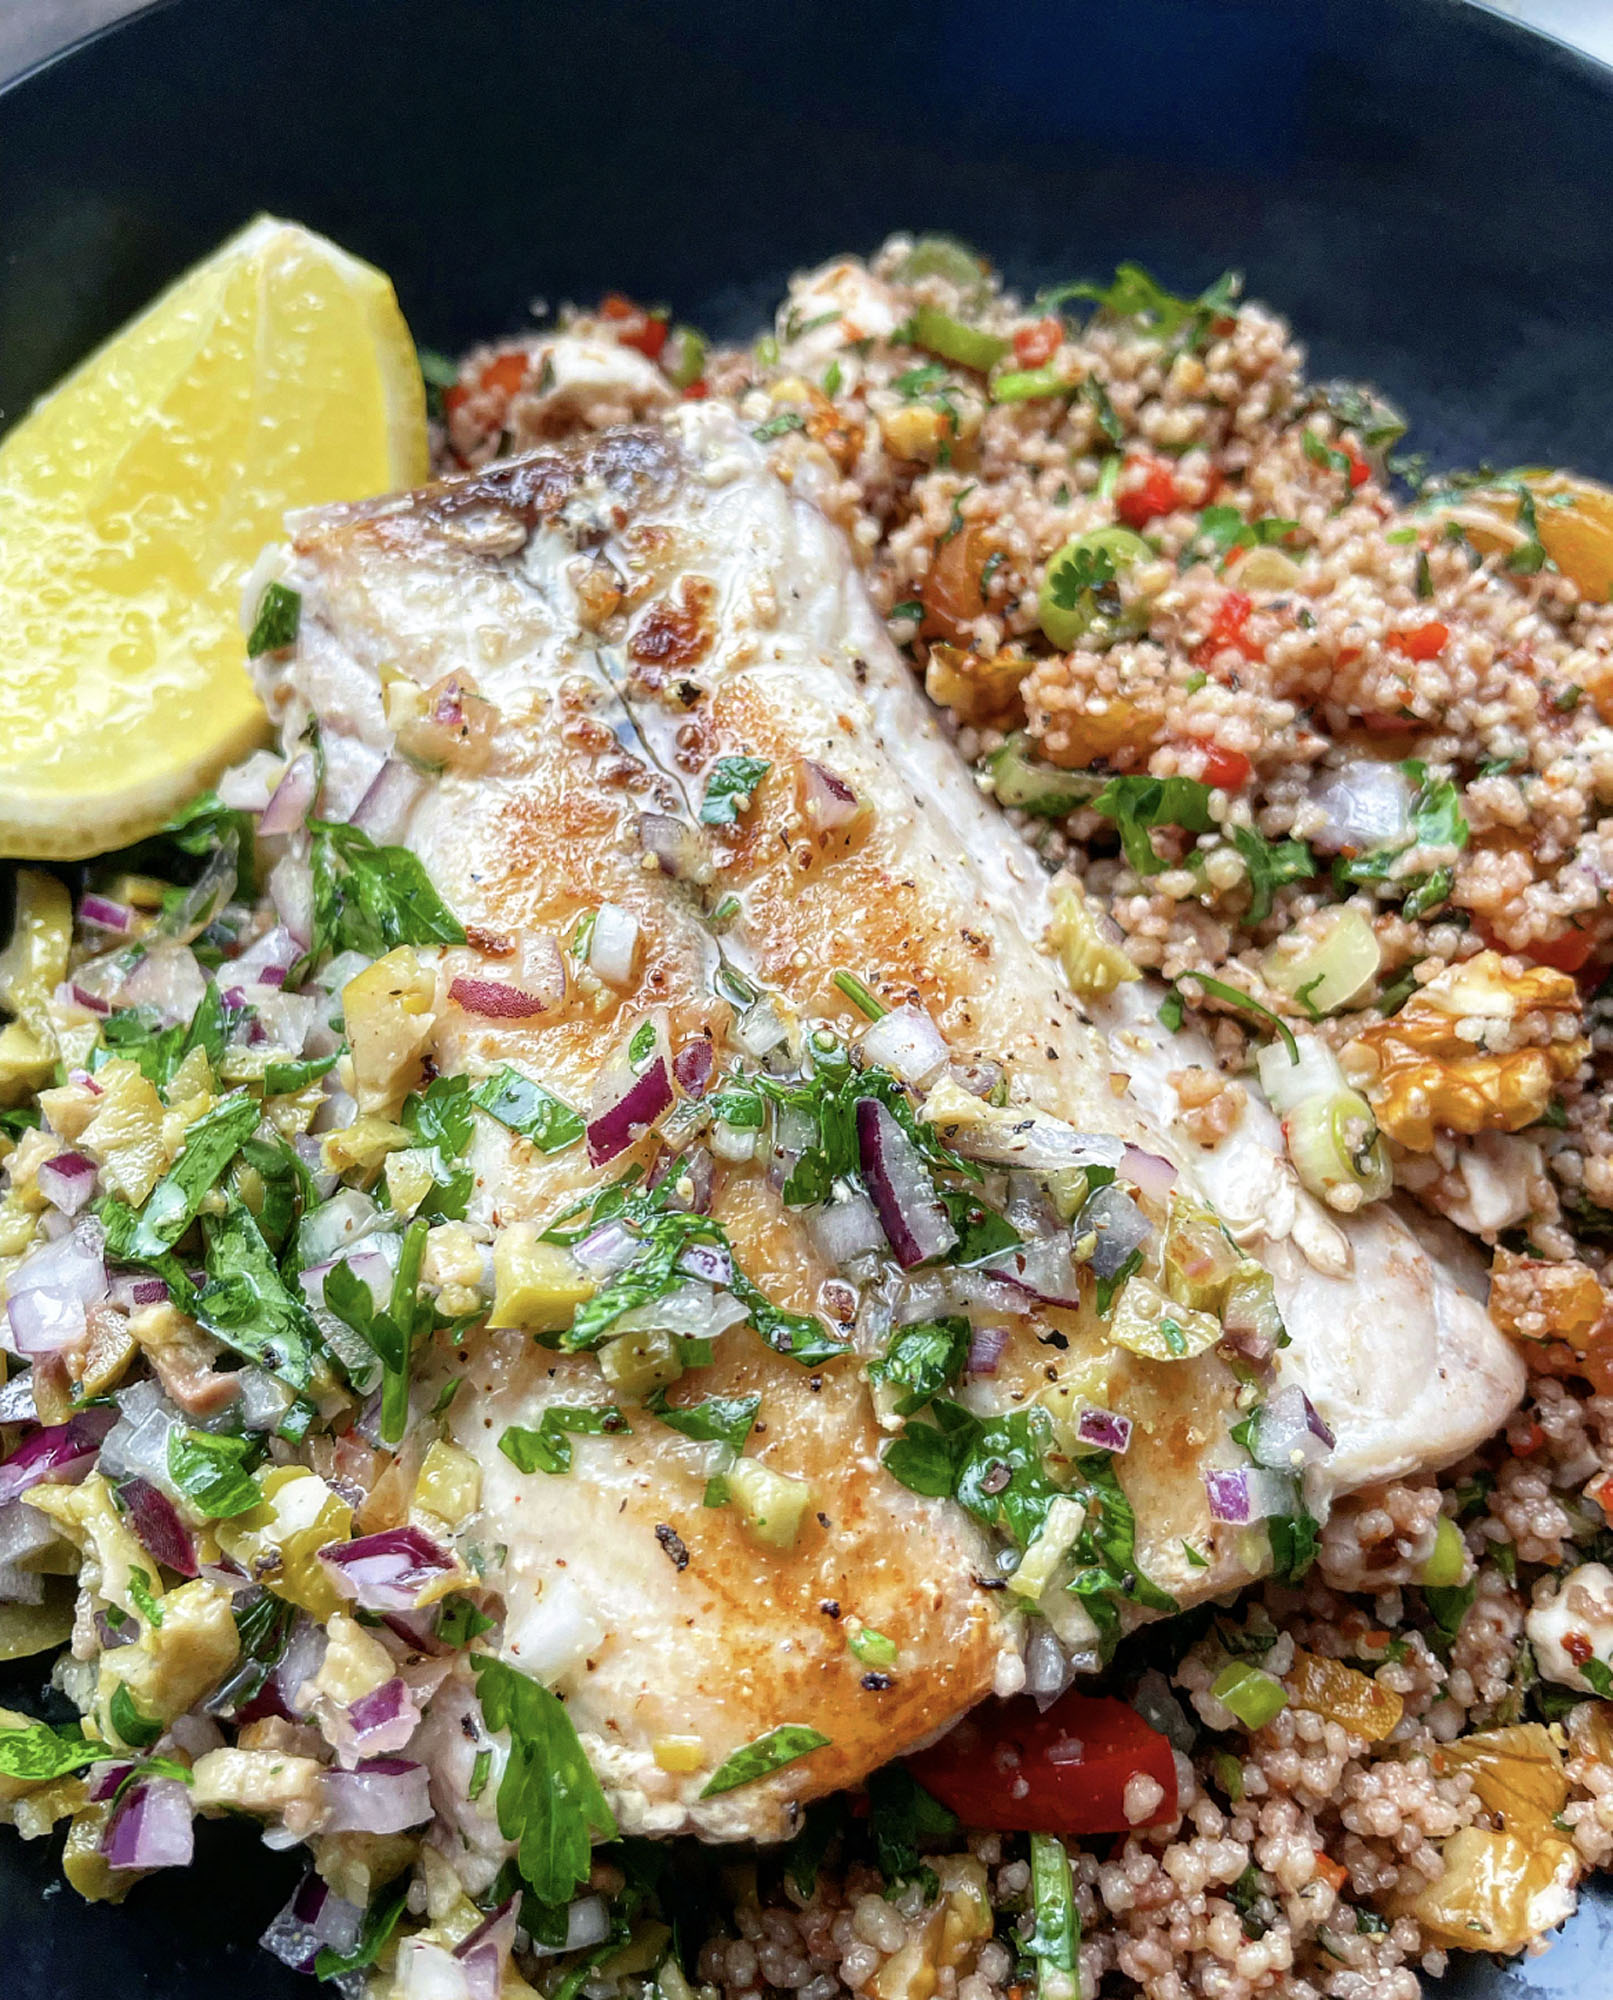 BBQ Red Snapper with Grilled Olive Salsa and Couscous Salad